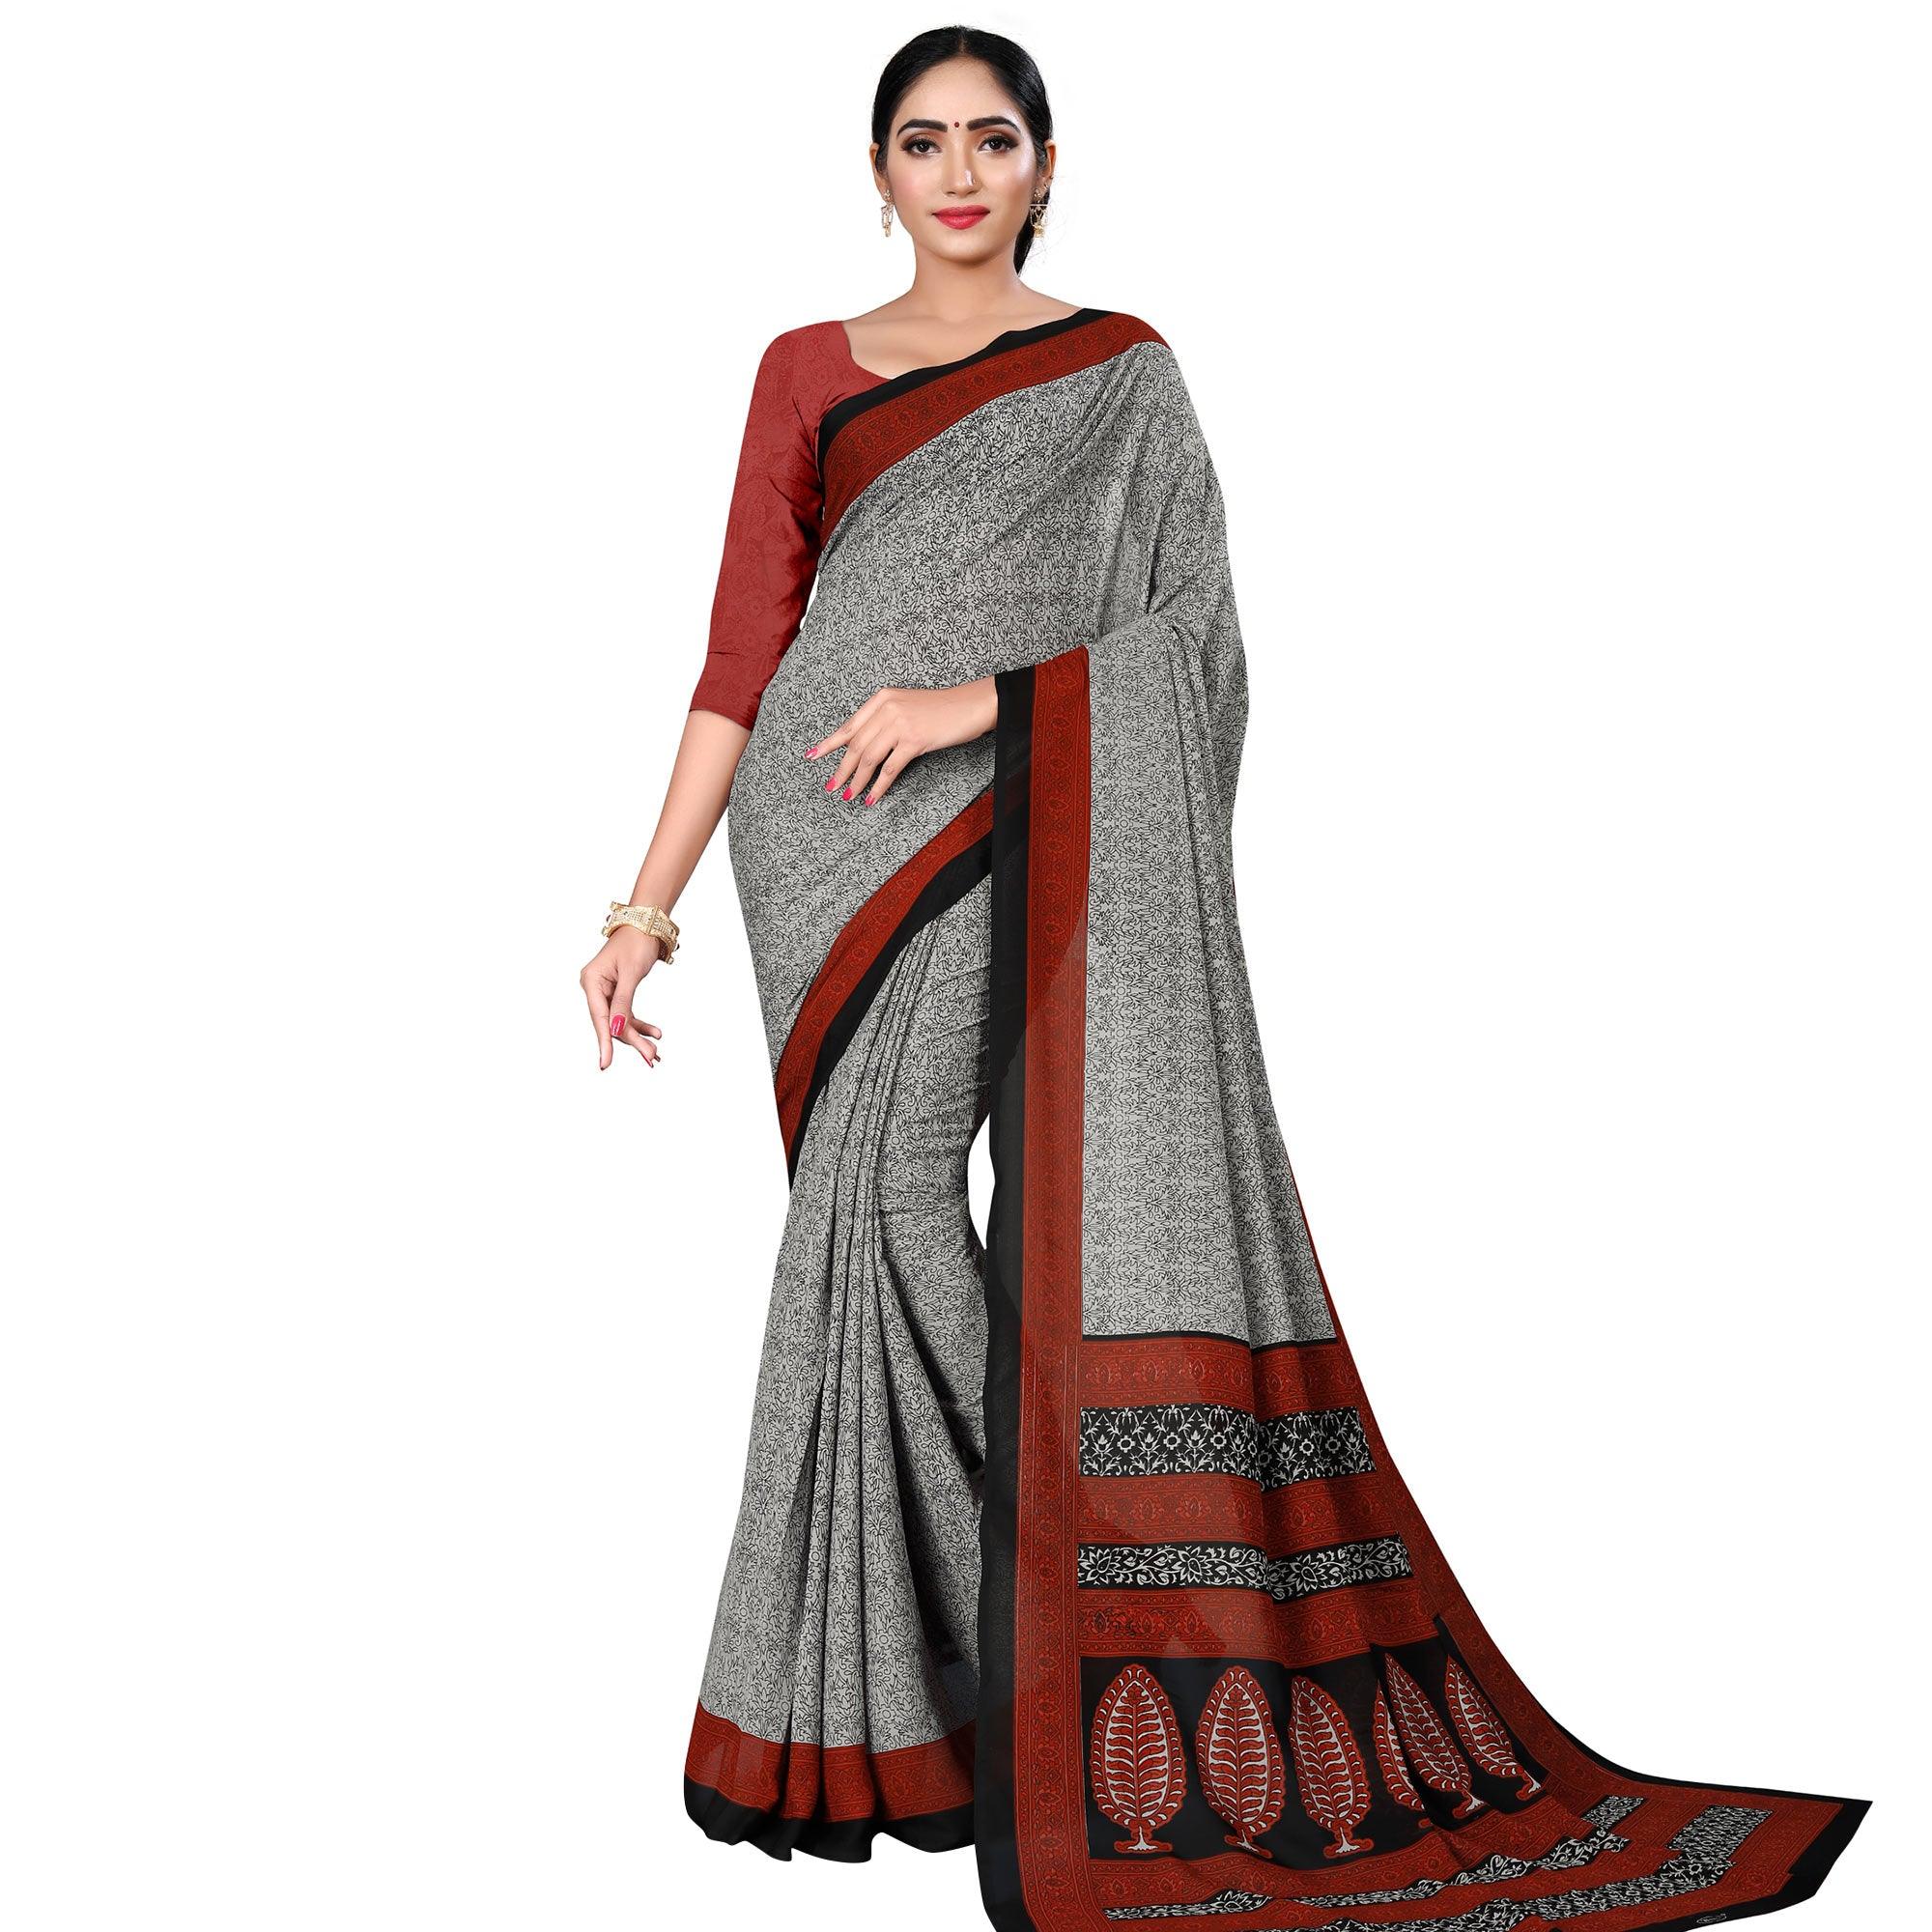 Engrossing Grey Colored Casual Wear Printed Georgette Saree - Peachmode